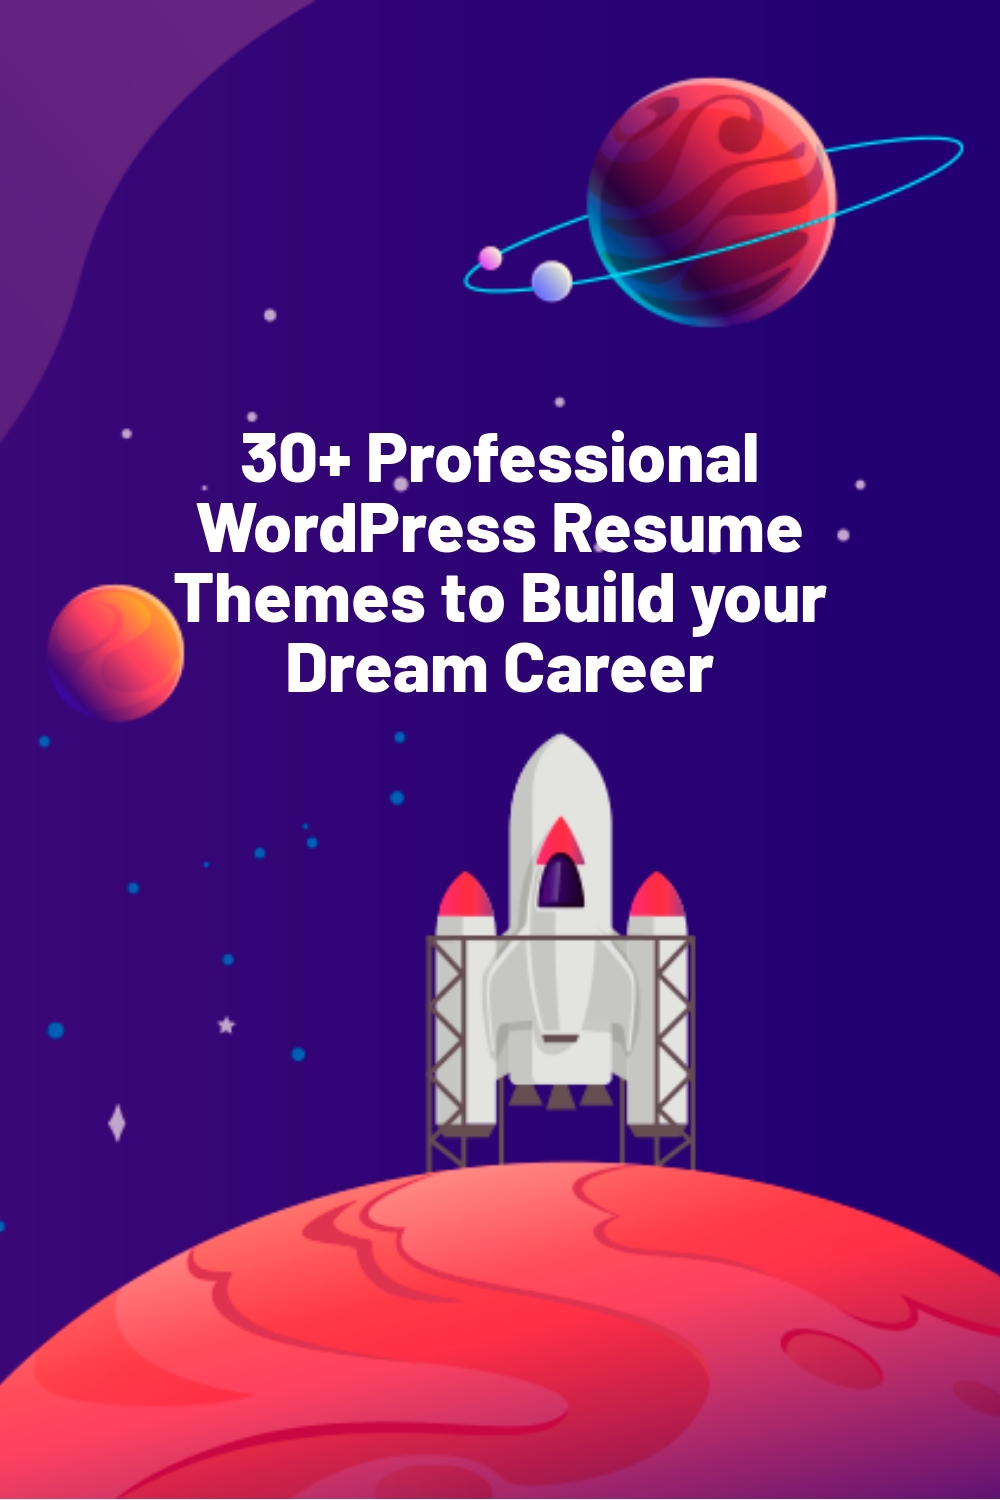 30+ Professional WordPress Resume Themes to Build your Dream Career